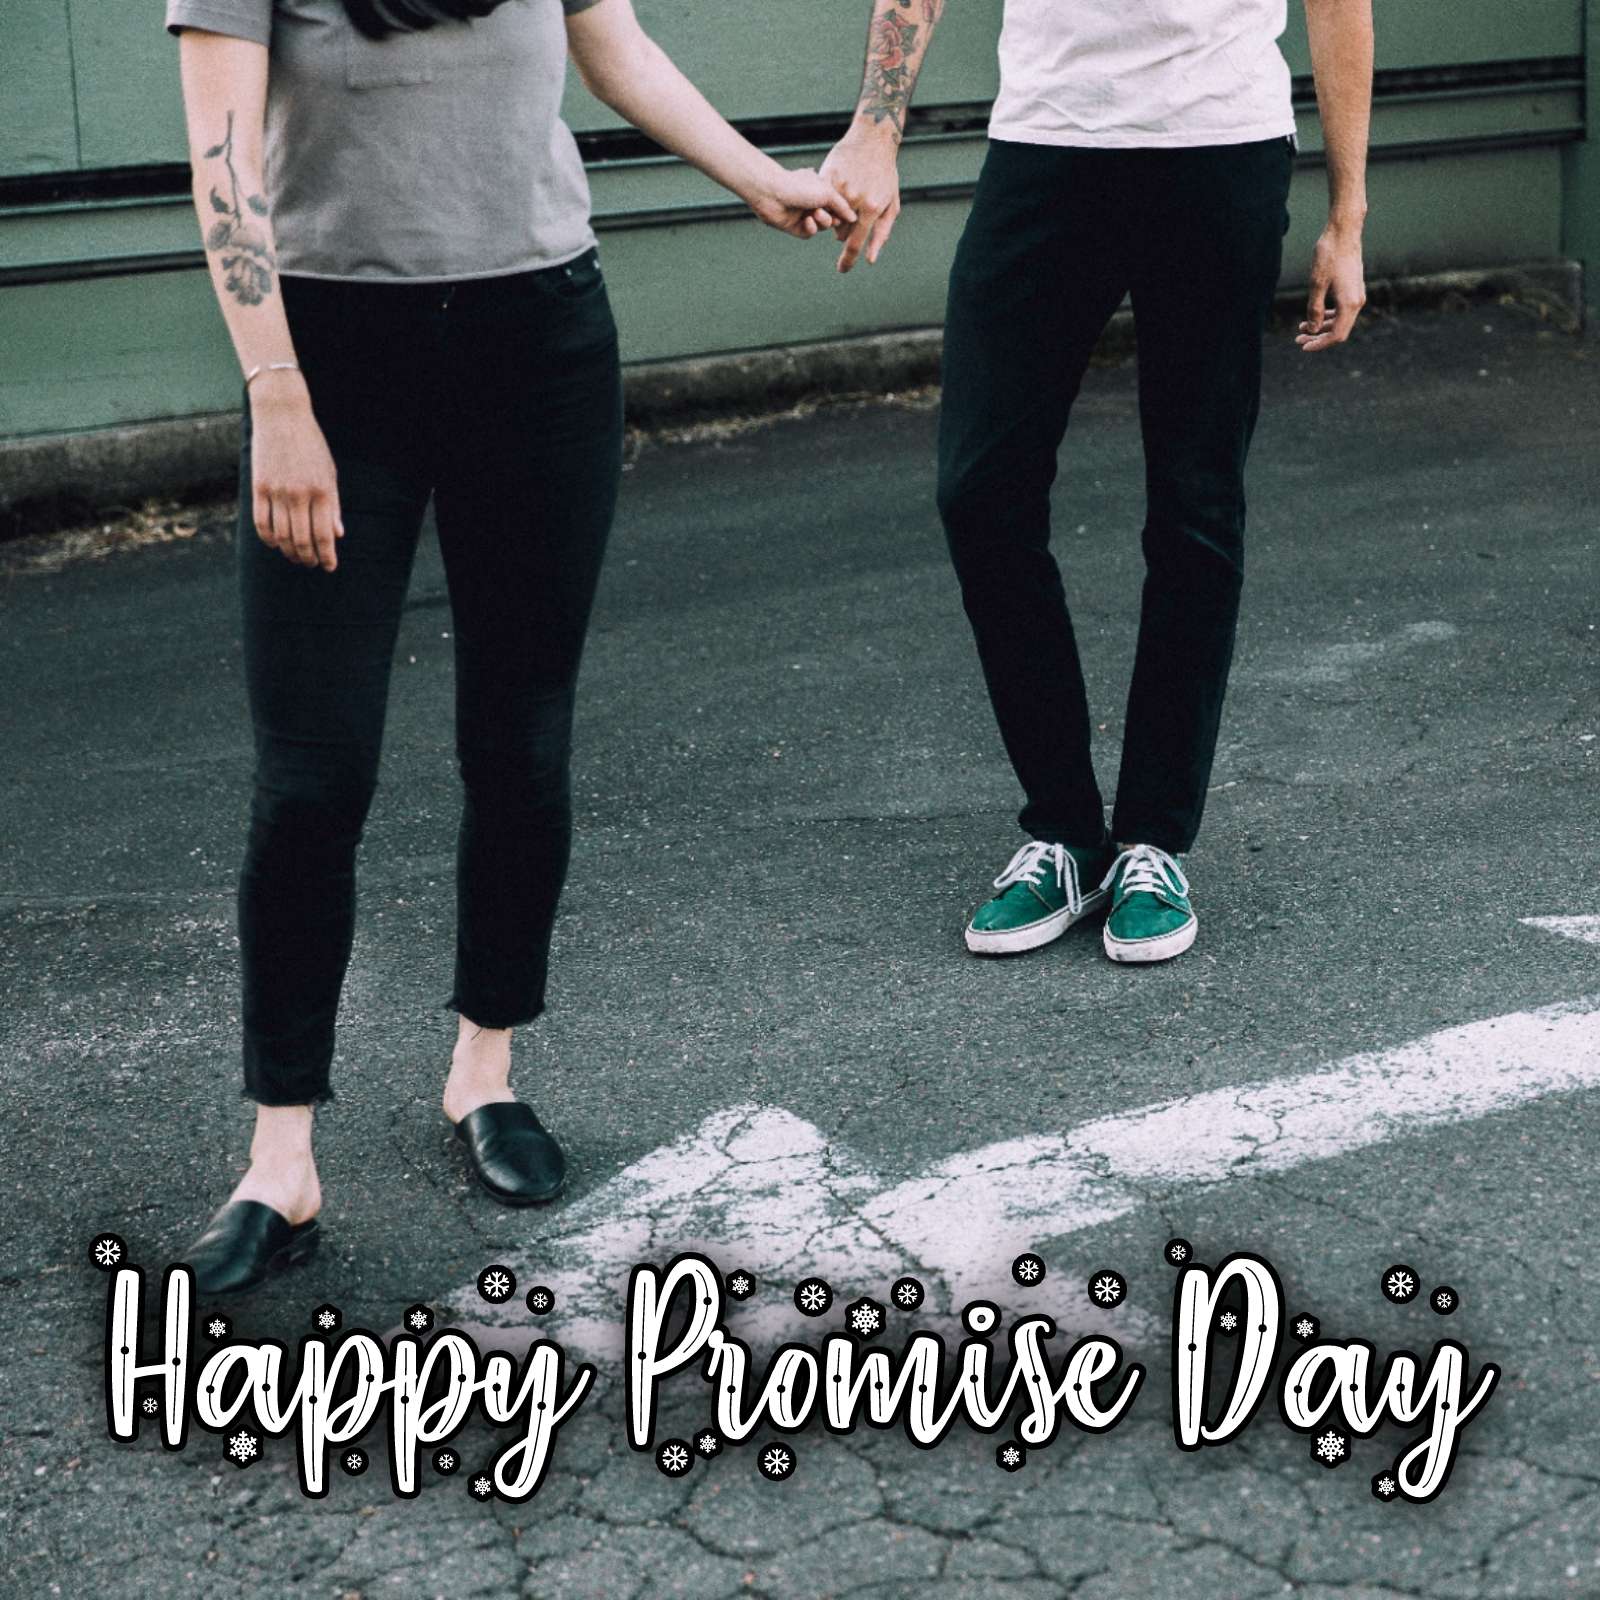 Promise Day Card Images Download